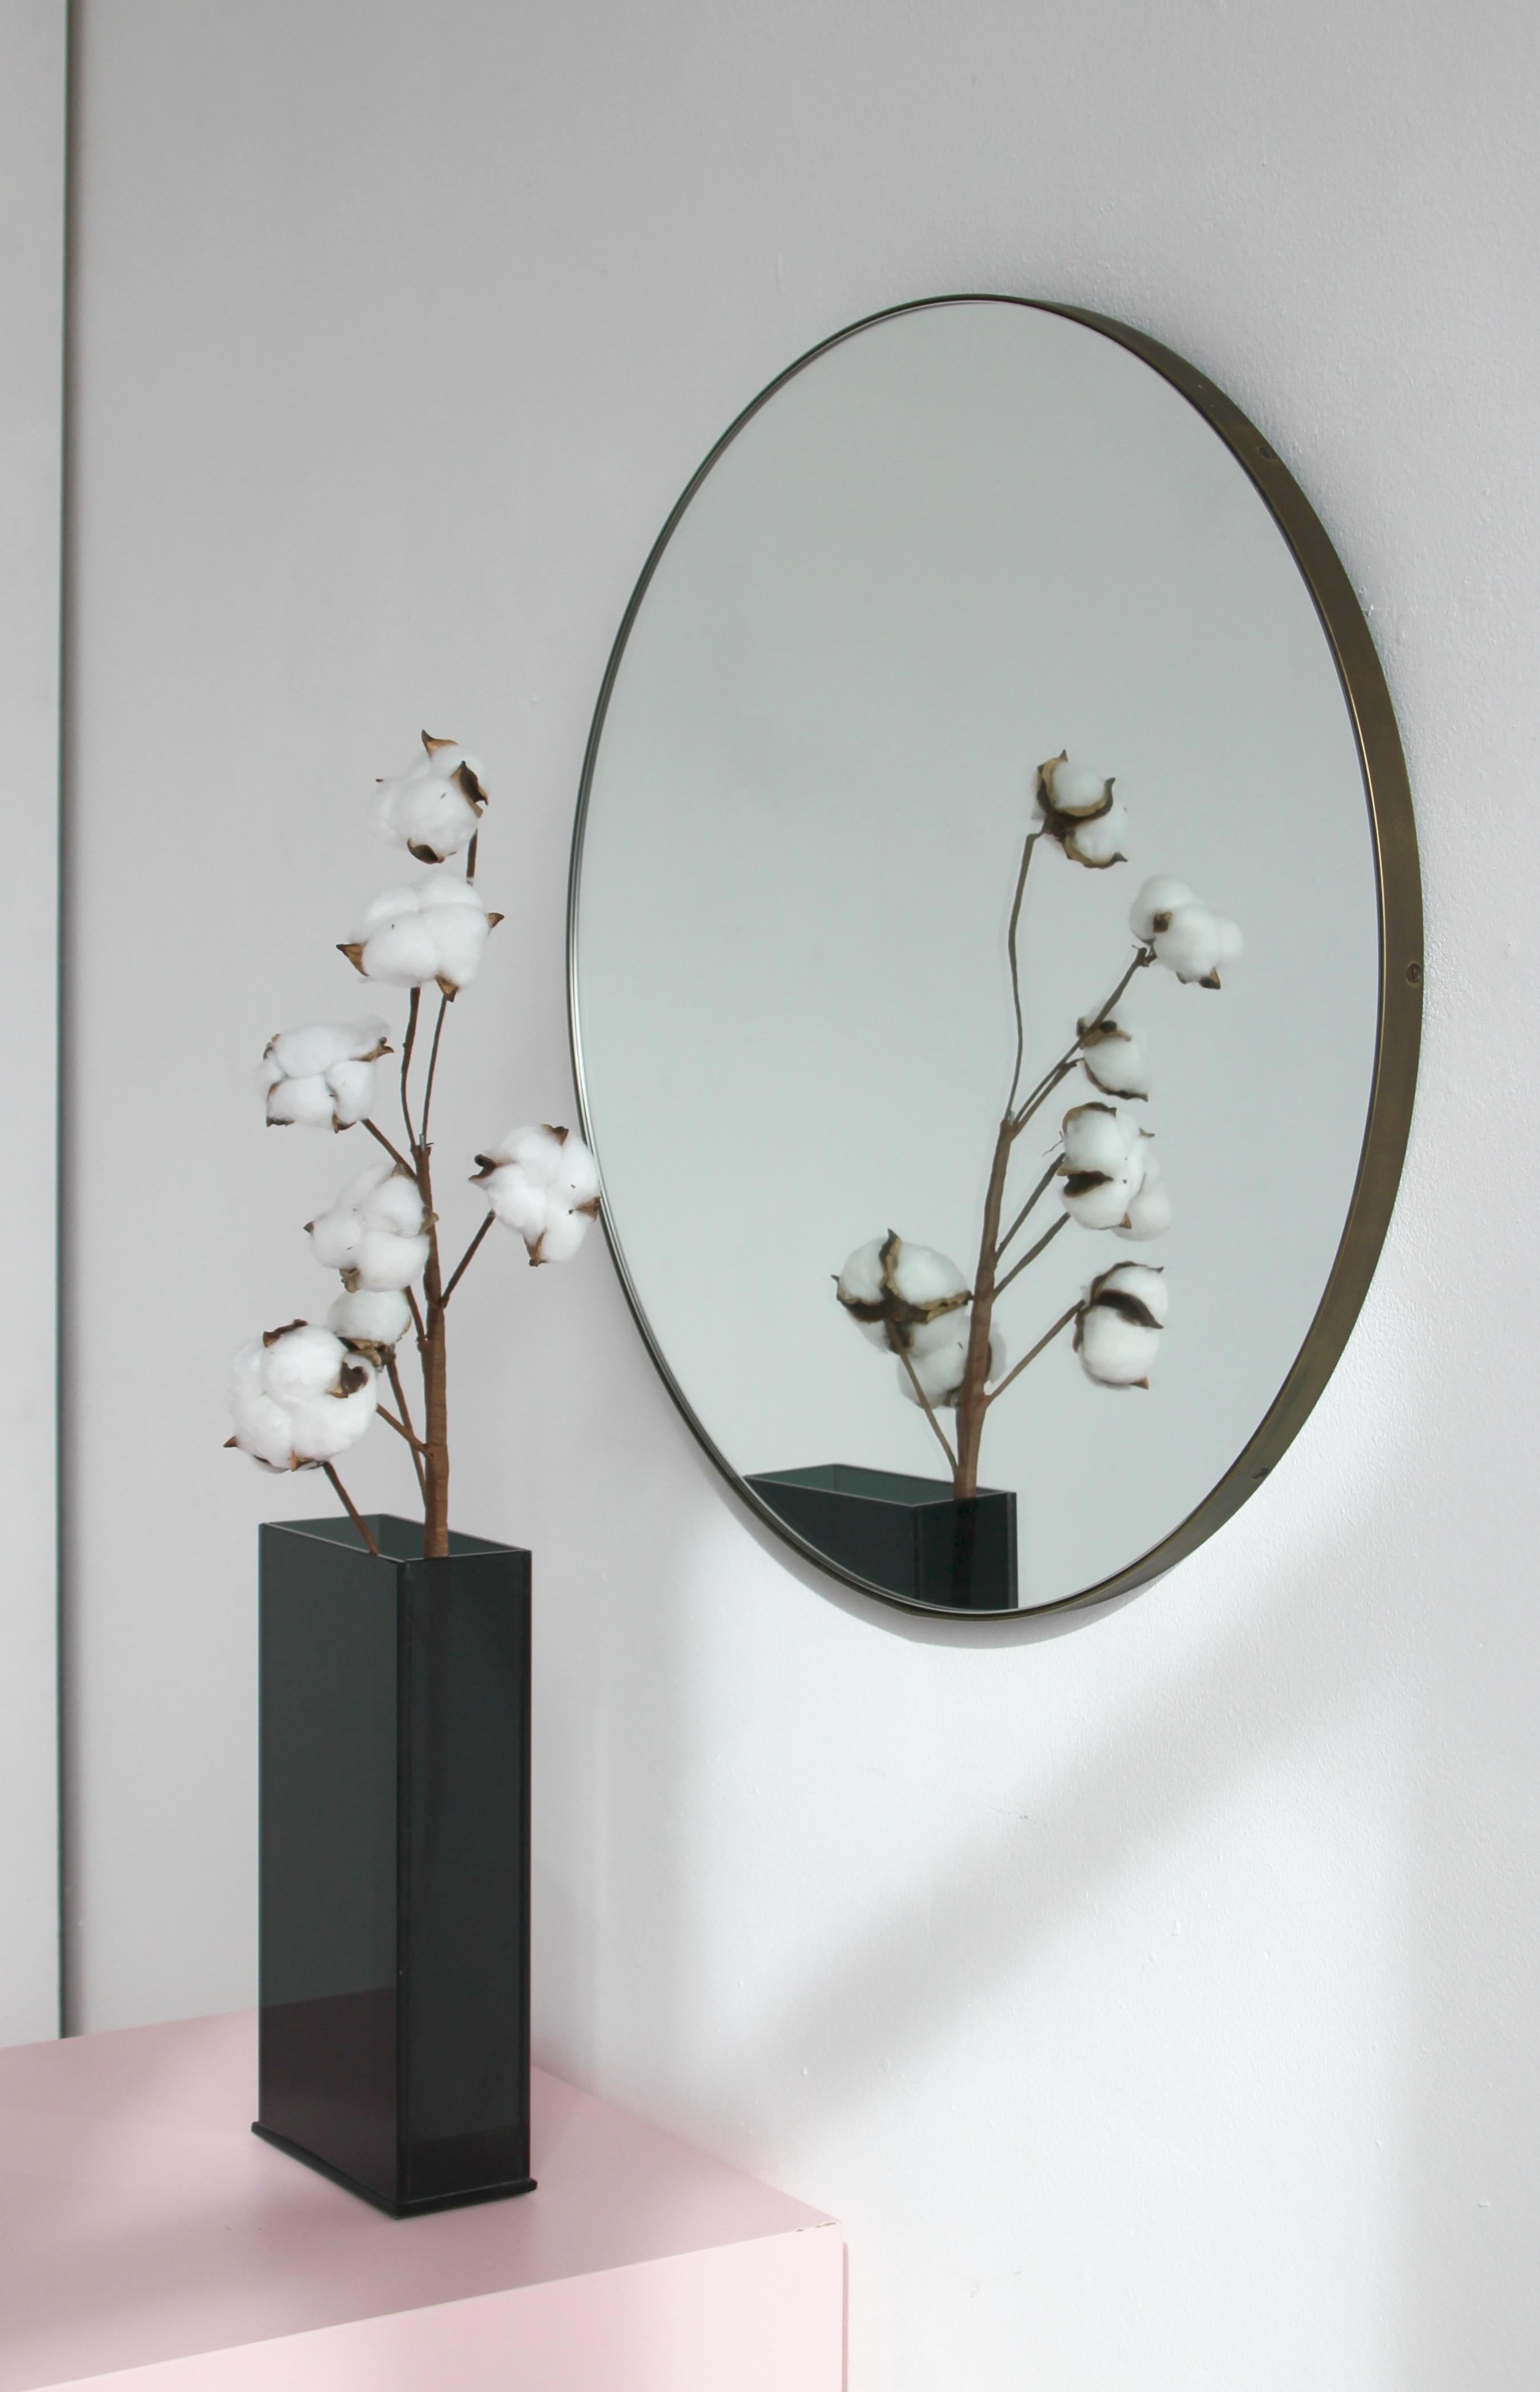 Minimalist Orbis™ round mirror with an elegant brass frame with a bronze patina finish. Designed and made in London, UK.

Our mirrors are designed with an integrated French cleat (split batten) system that ensures the mirror is securely mounted